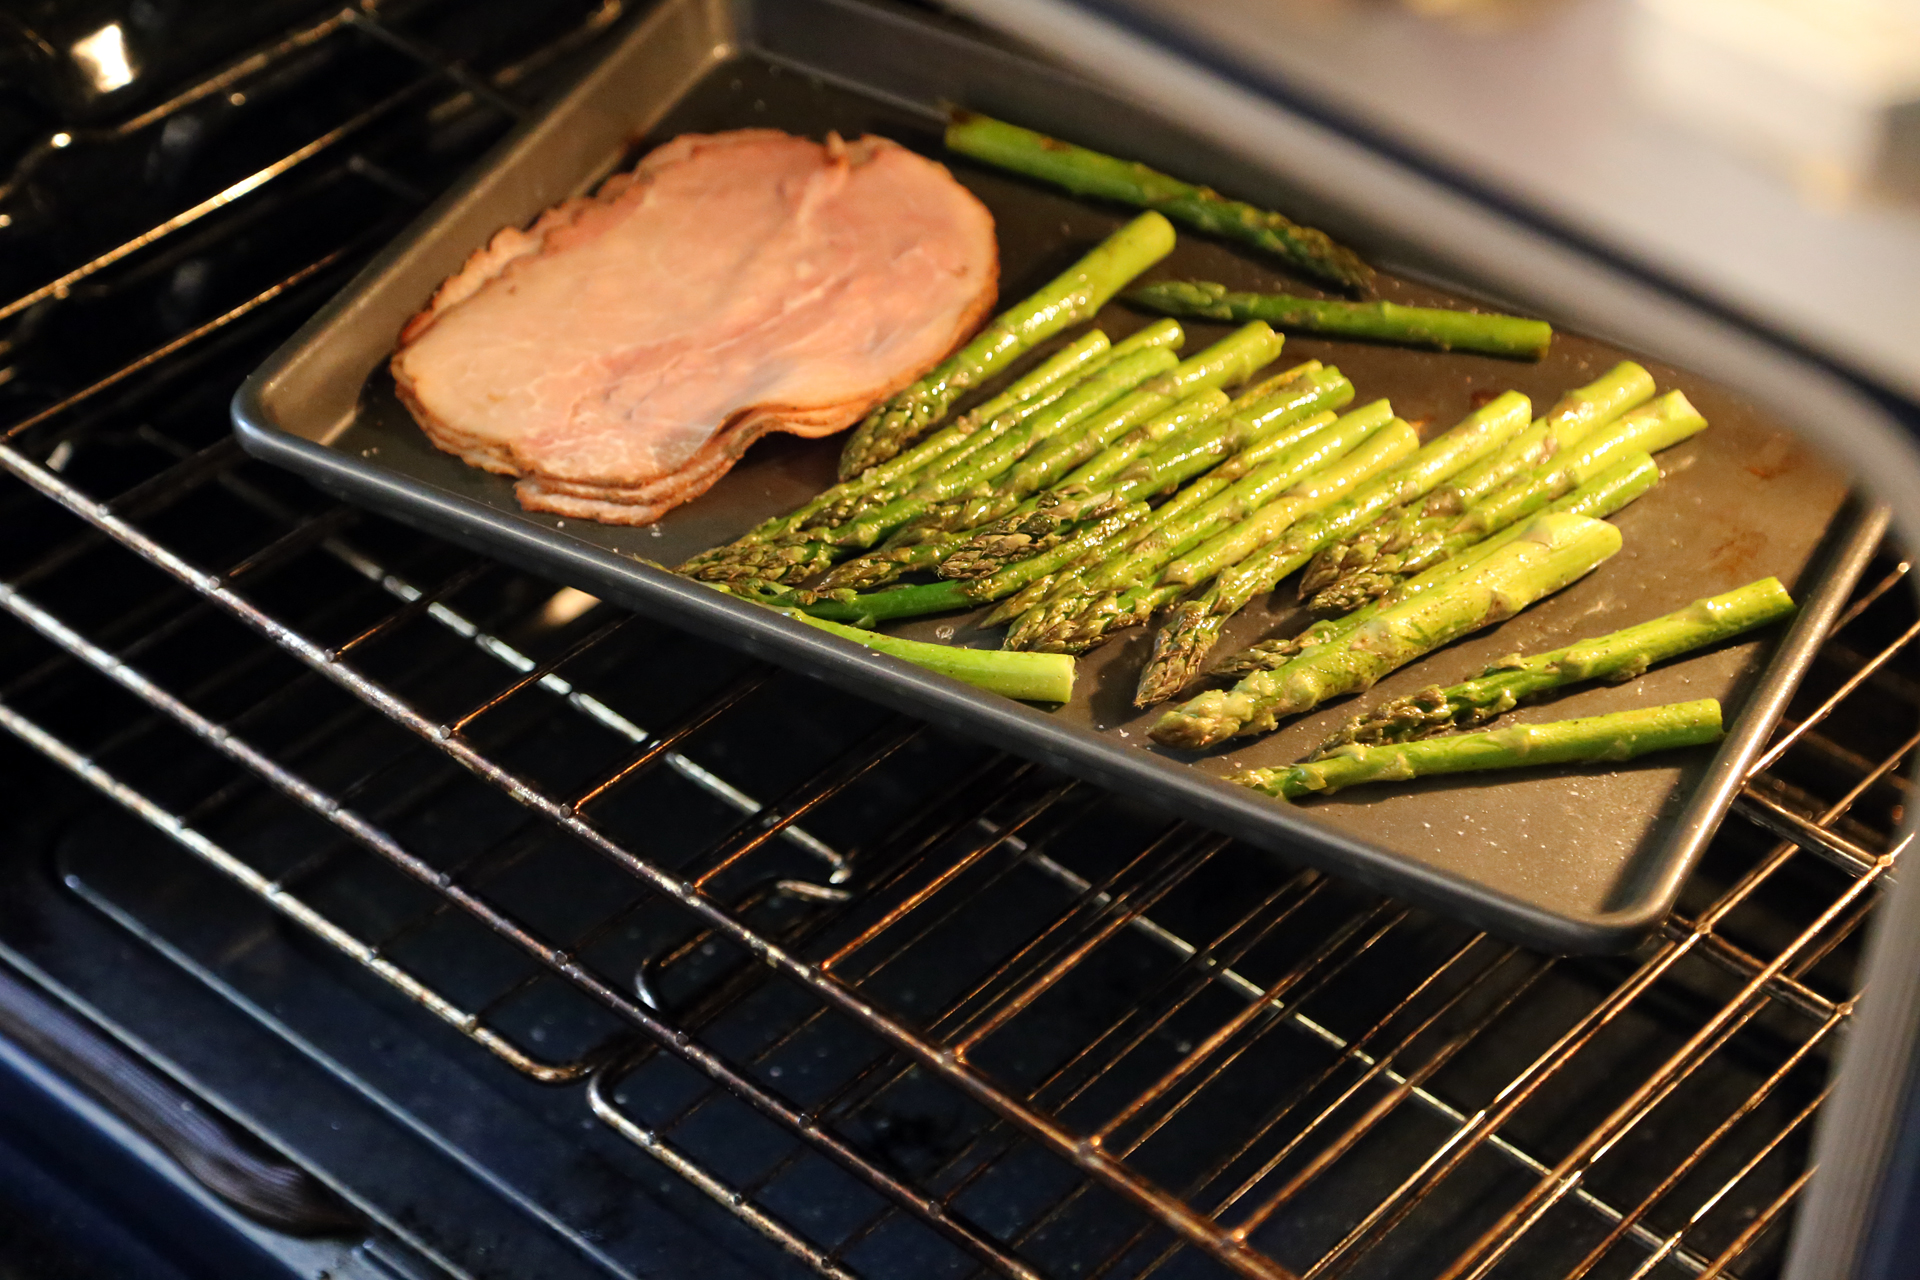 Just before the asparagus is ready, push it over to the side of the baking sheet, and add the ham slices, spreading them out.